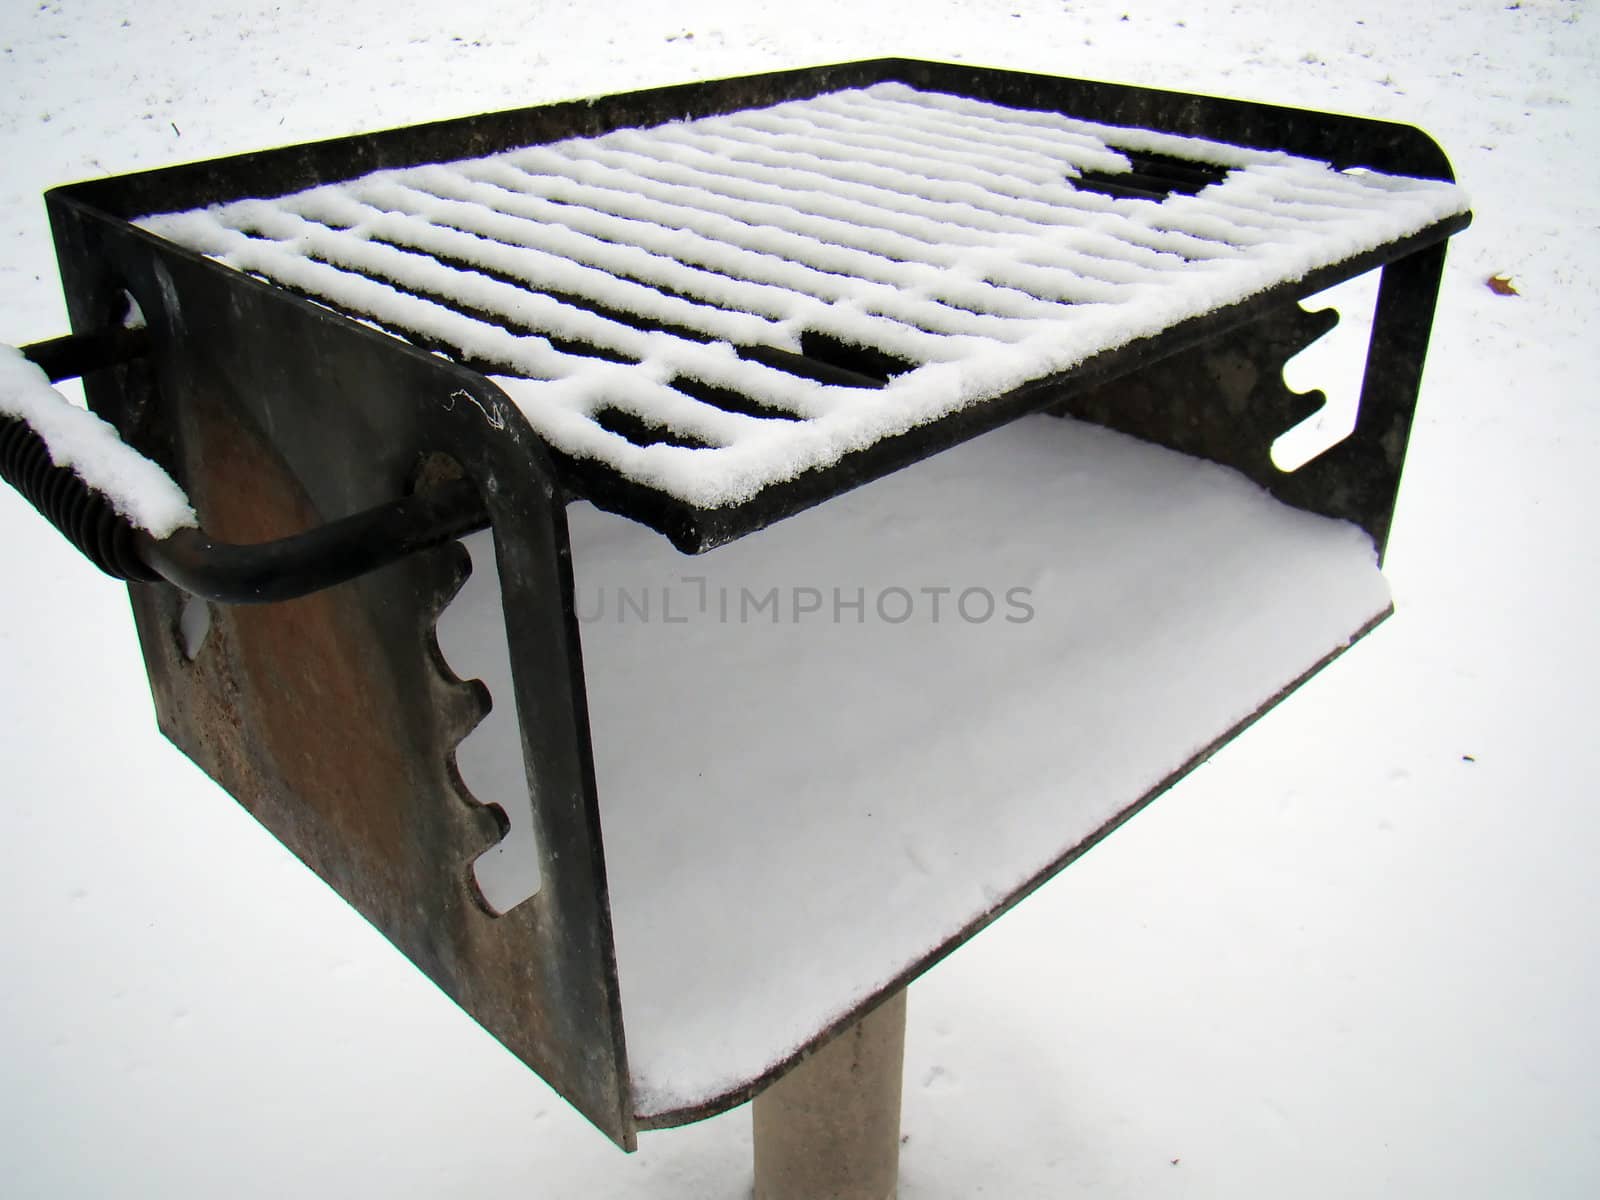 a forest preserve grill, covered with snow